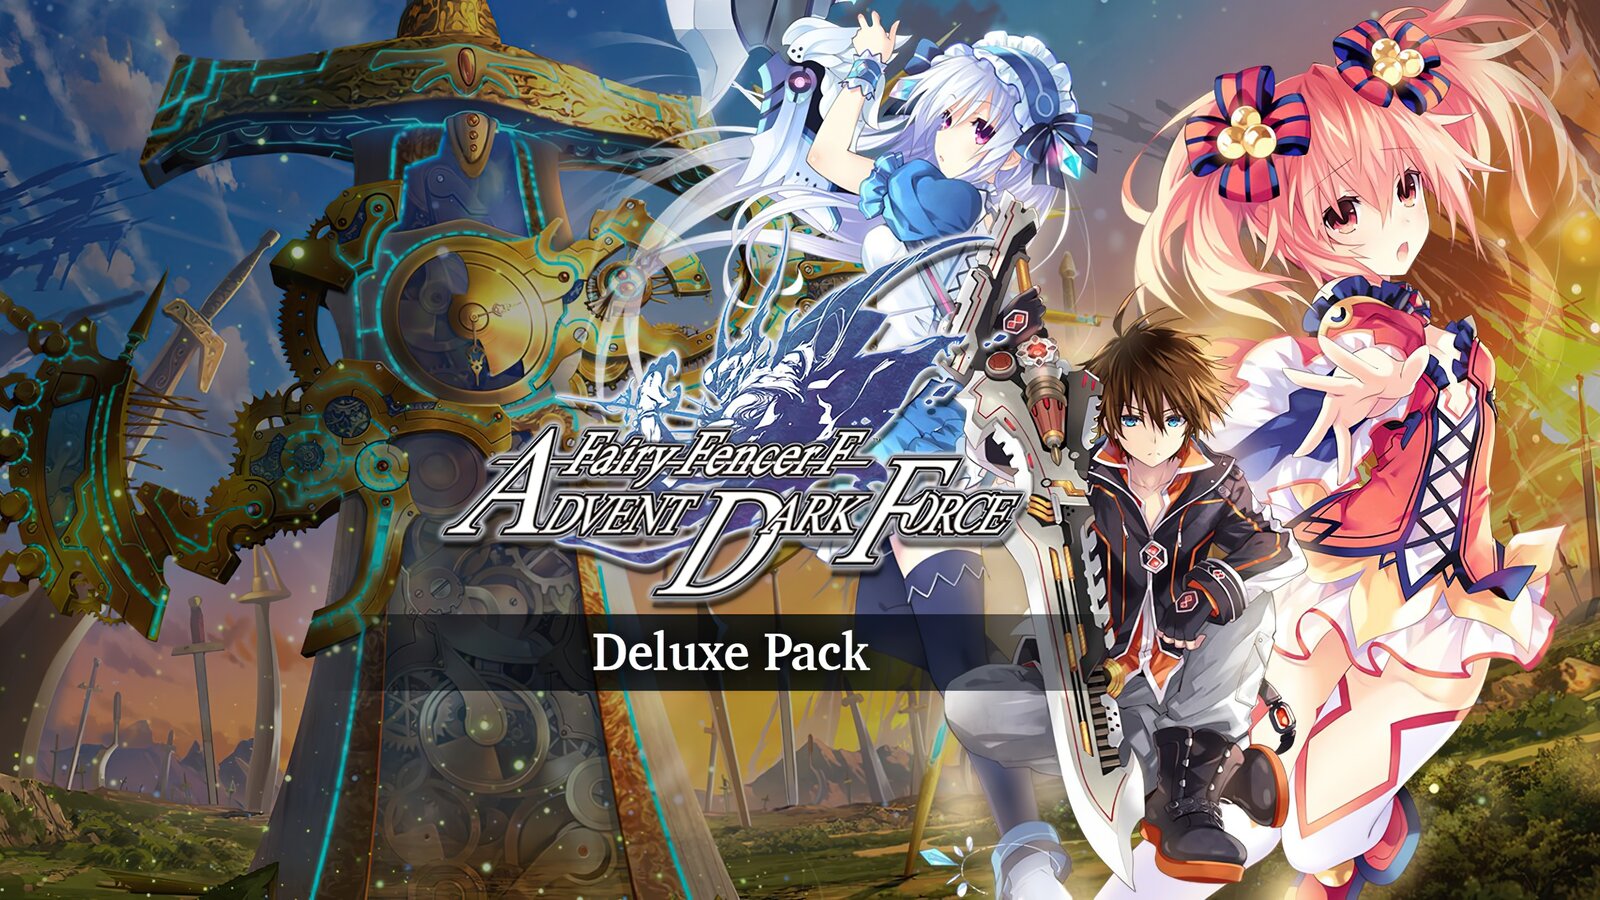 Fairy Fencer F: Advent Dark Force - Deluxe Pack